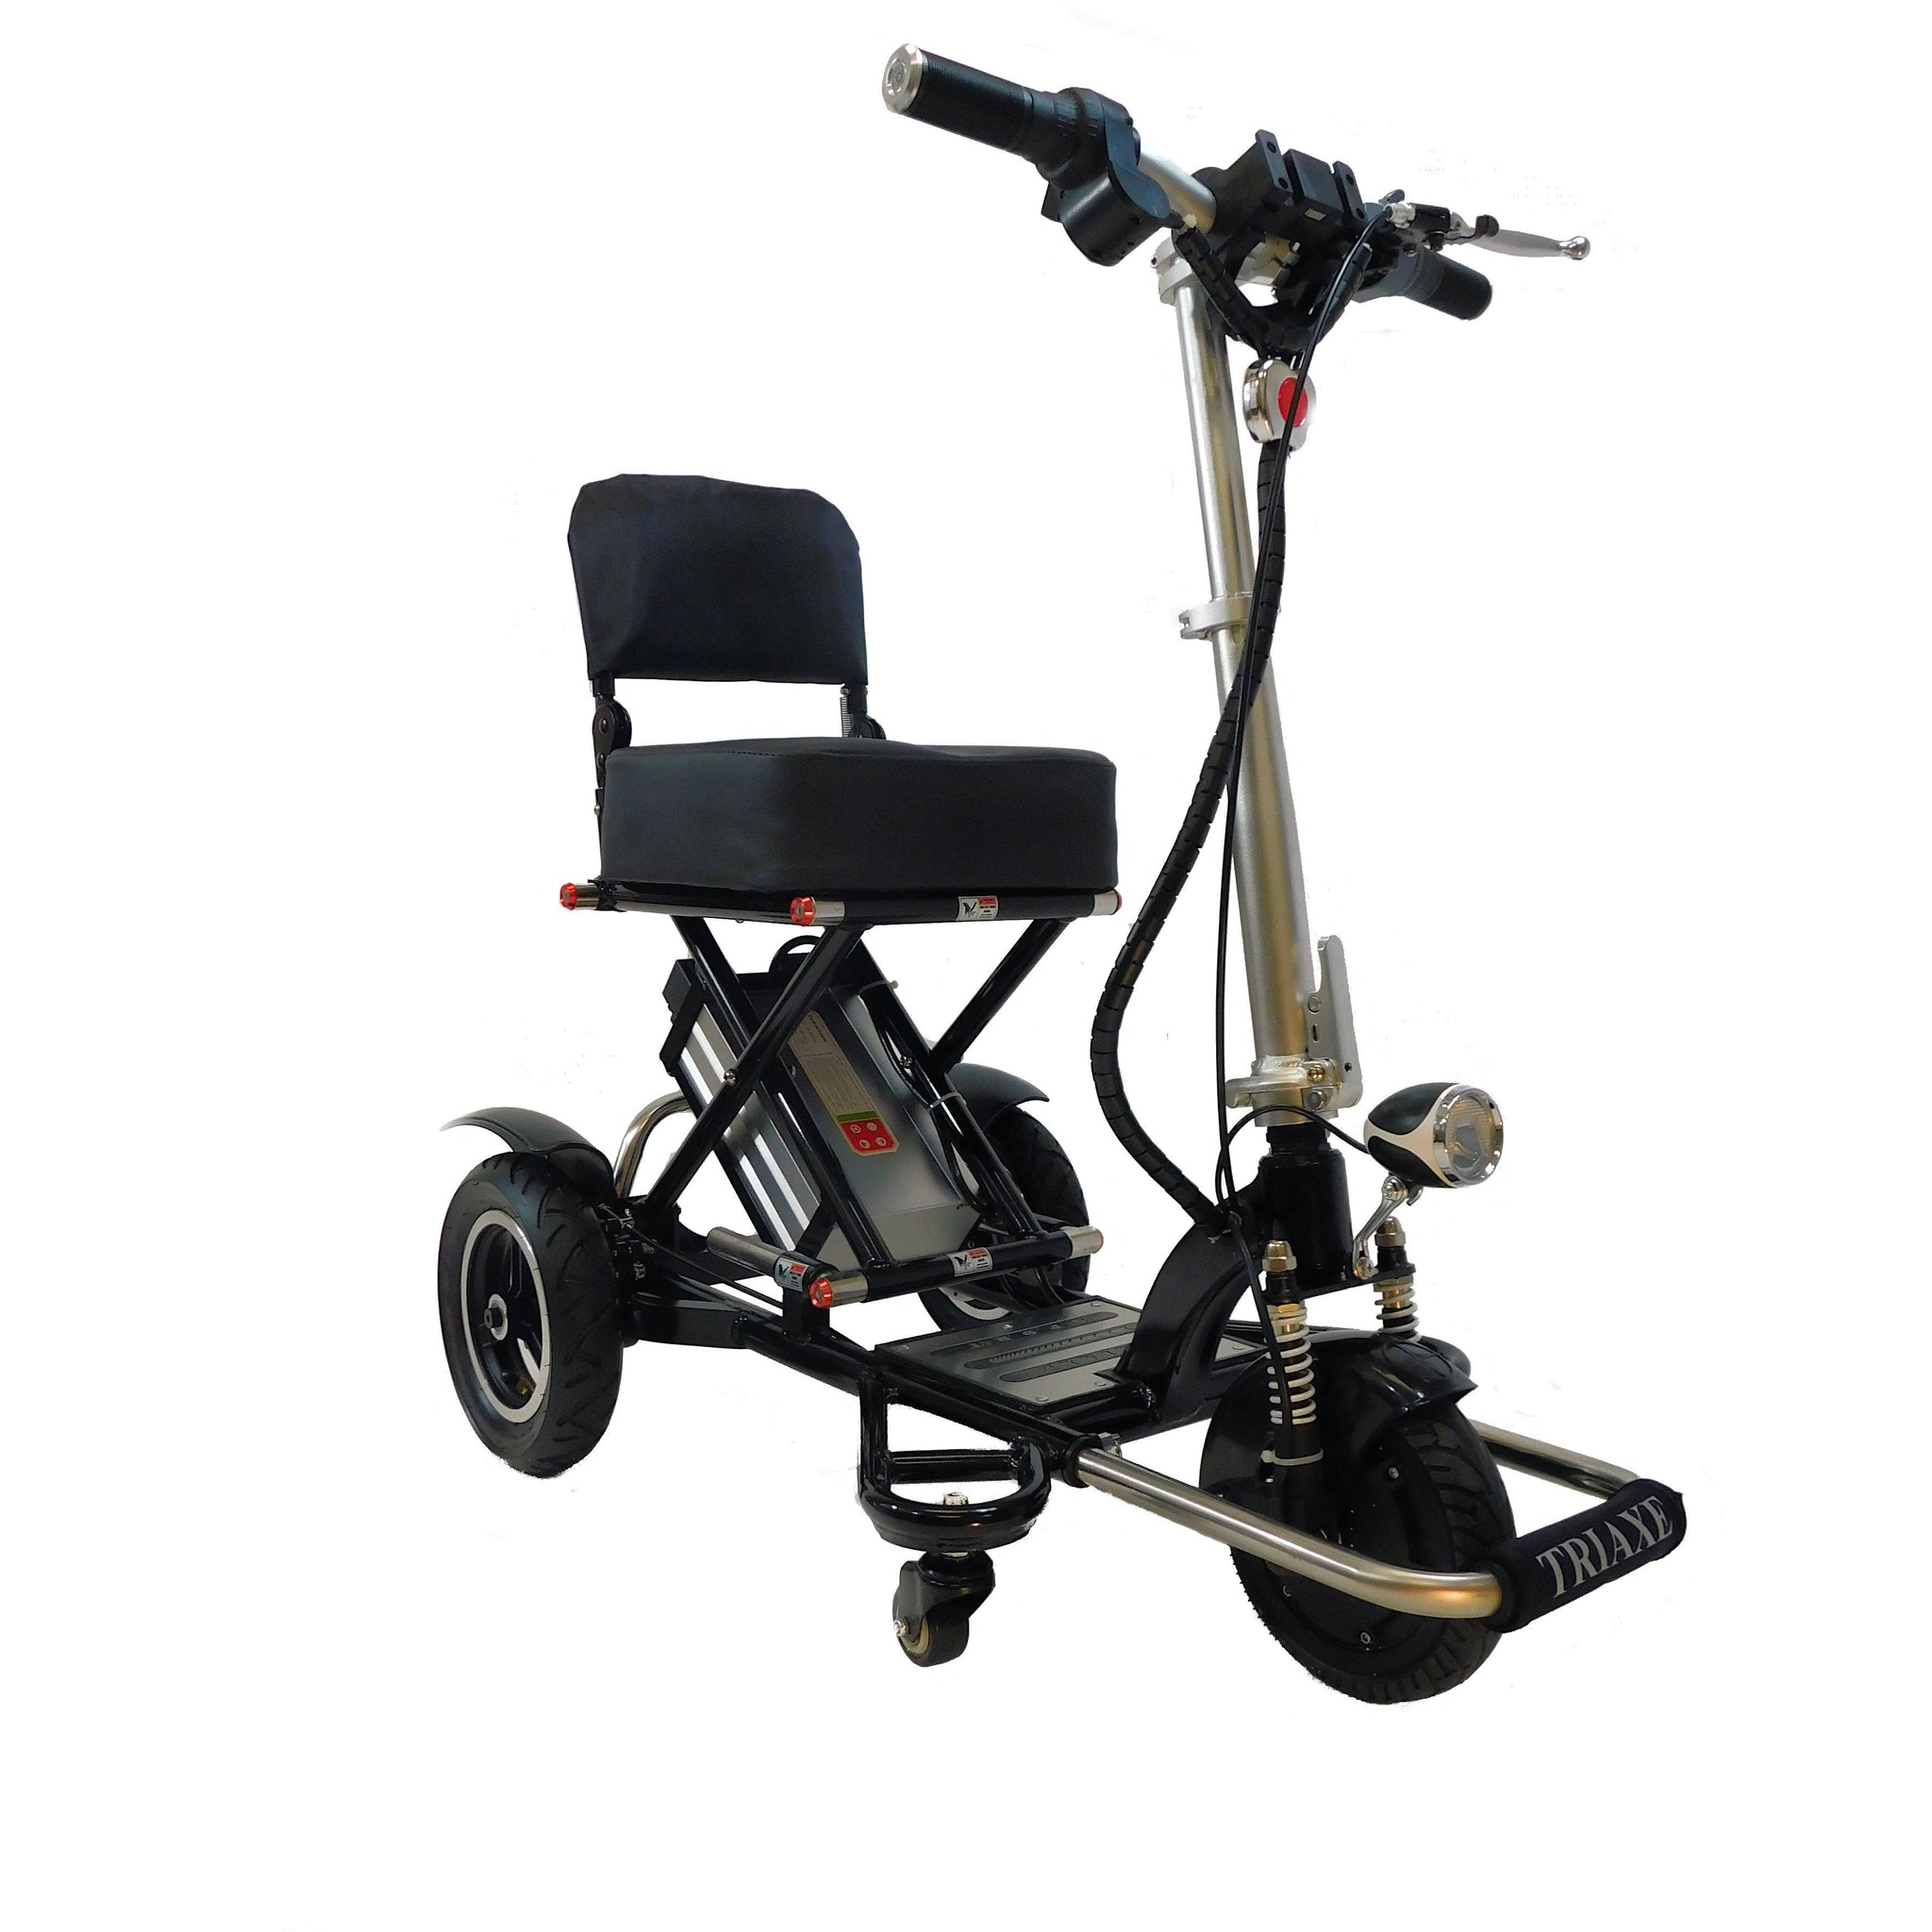 Triaxe Sport Scooter